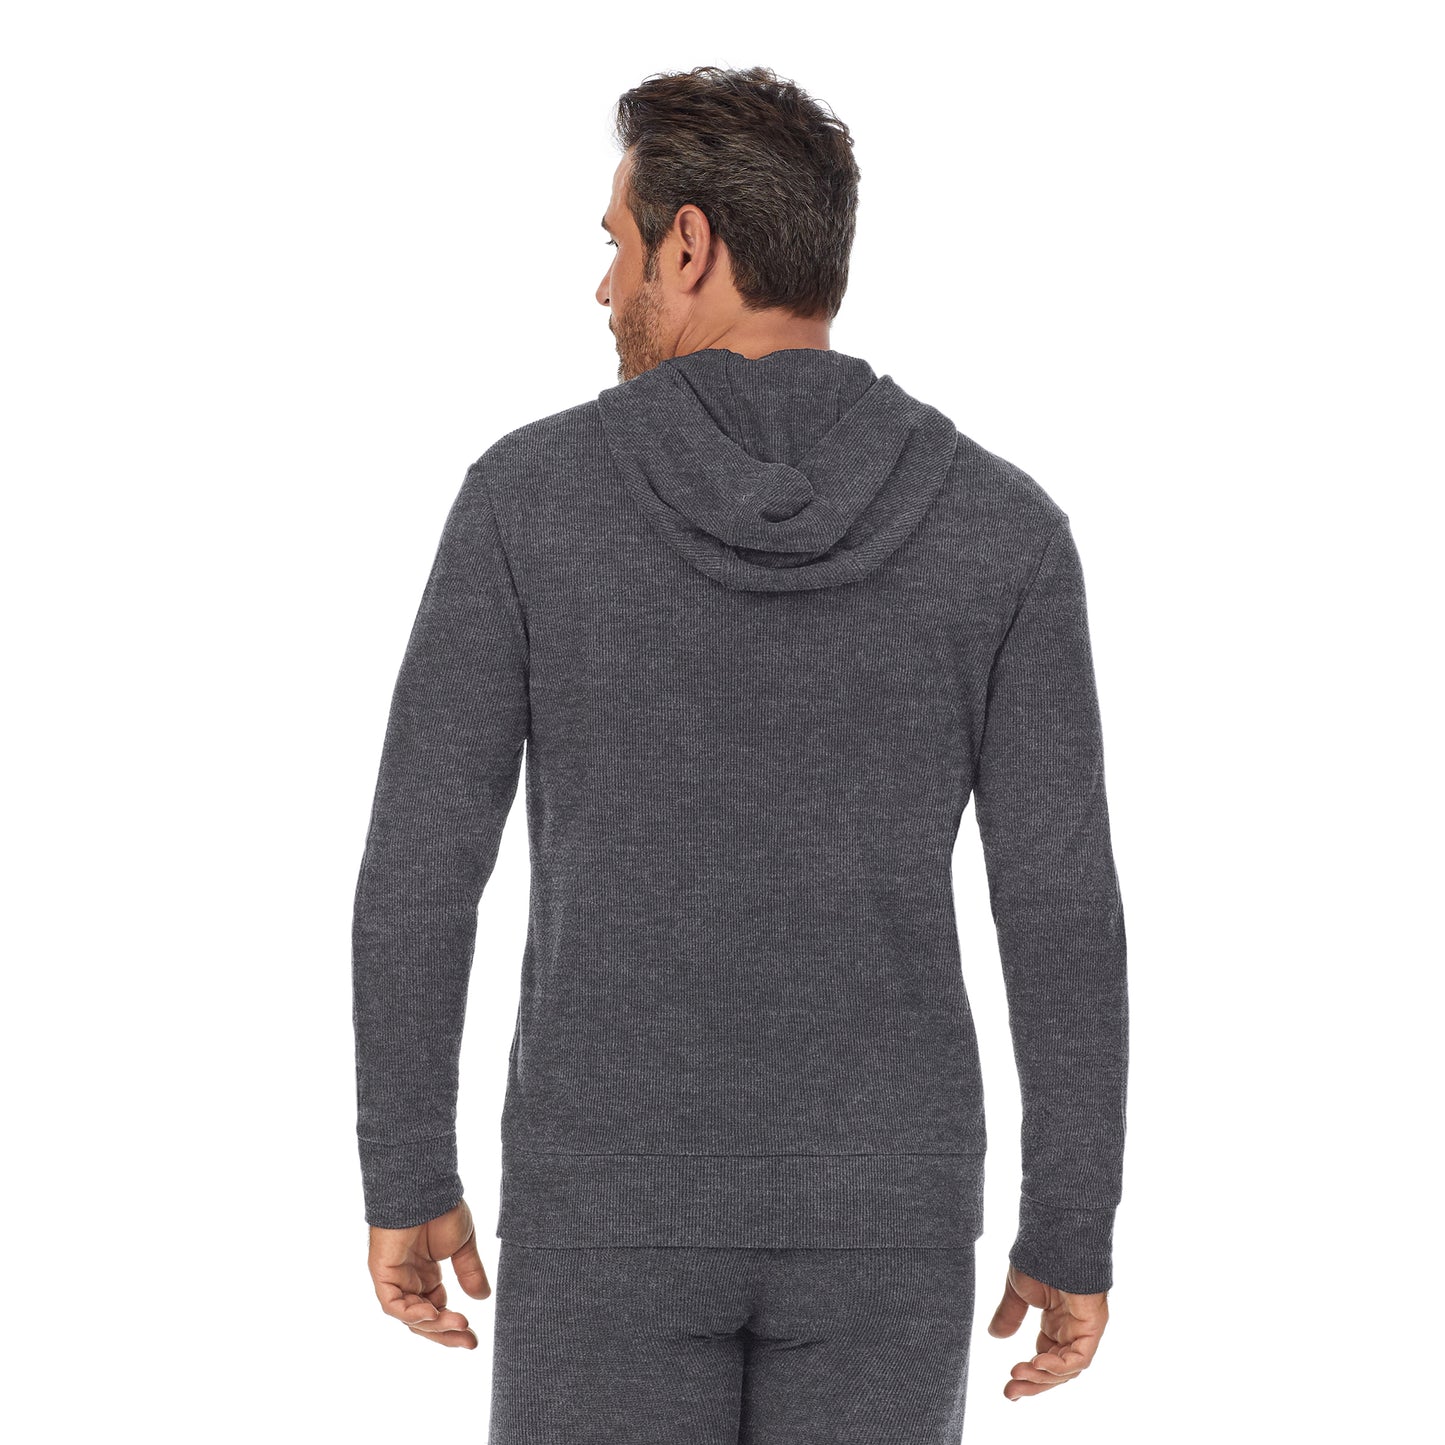 Charcoal Heather;Model is wearing size M. He is 6'2", Waist 32", Inseam 34".@A man wearing charcoal heather Waffle Thermal Pull-Over Hoodie